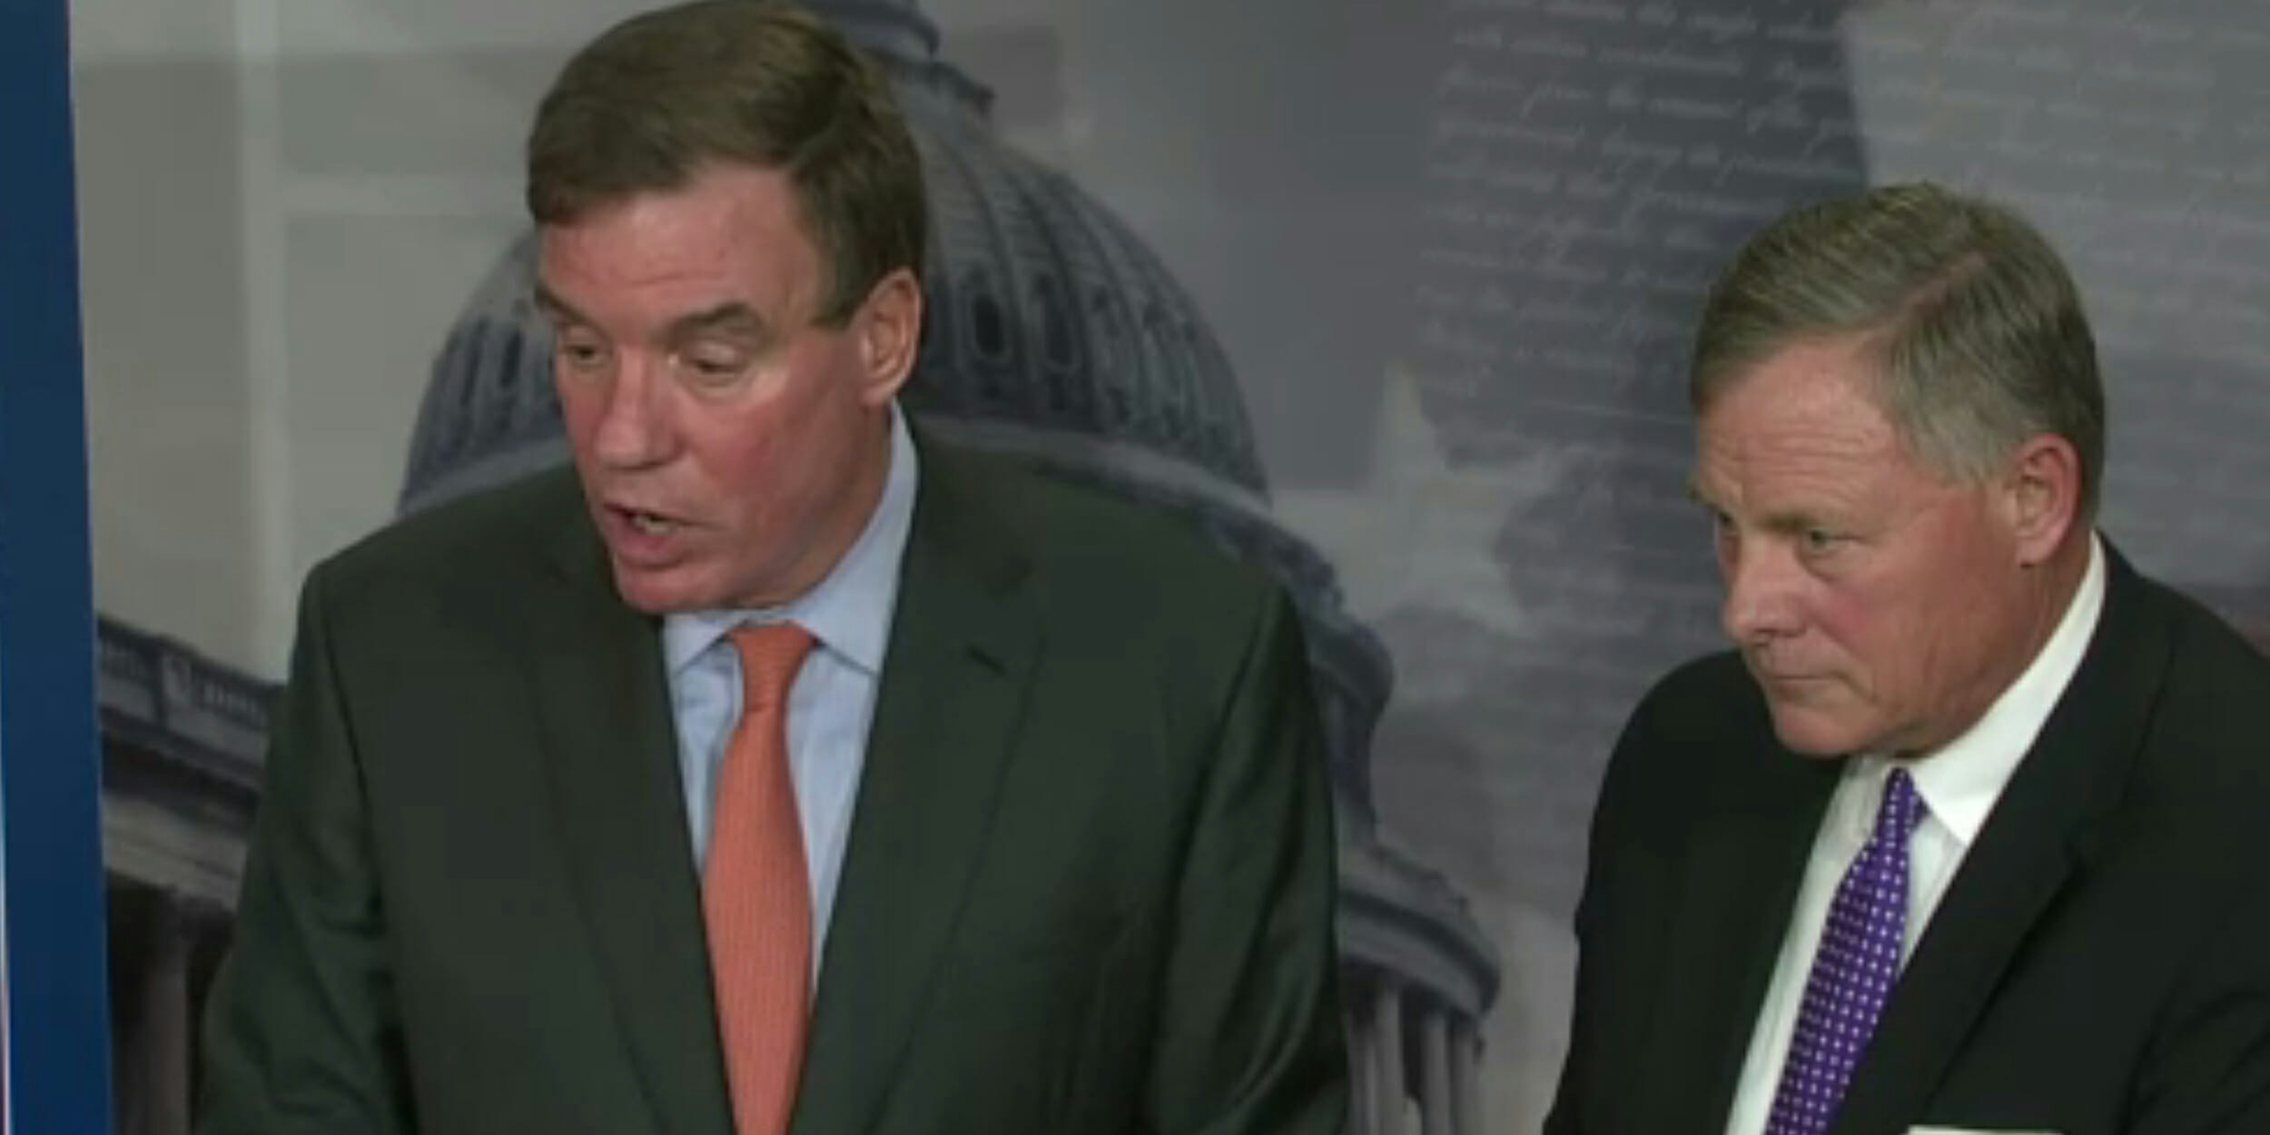 Sen. Mark Warner and Sen. Richard Burr said the Senate Intelligence Committee said there has not been any conclusion to its investigation into Russia meddling in the 2016 election.